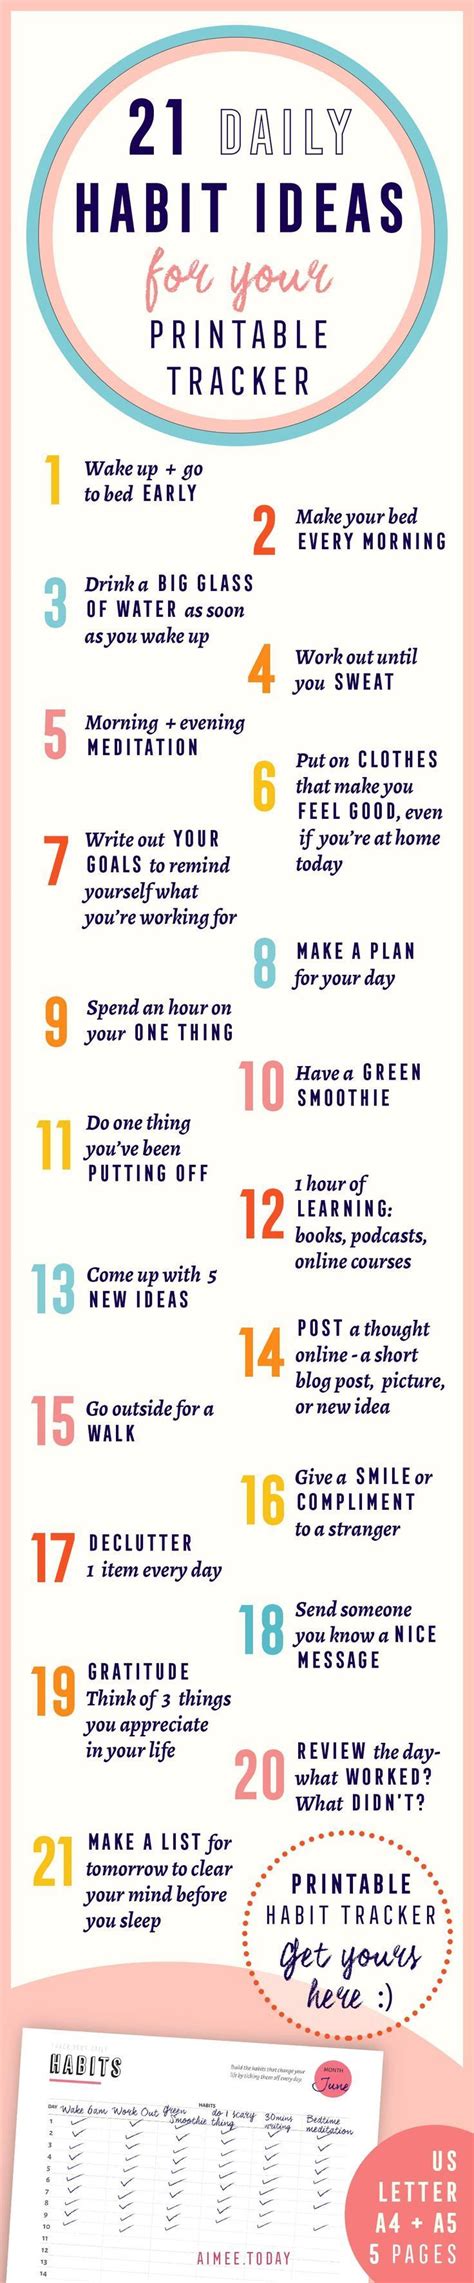 21 Ideas For Good Habits That You Can Build And Track With Your